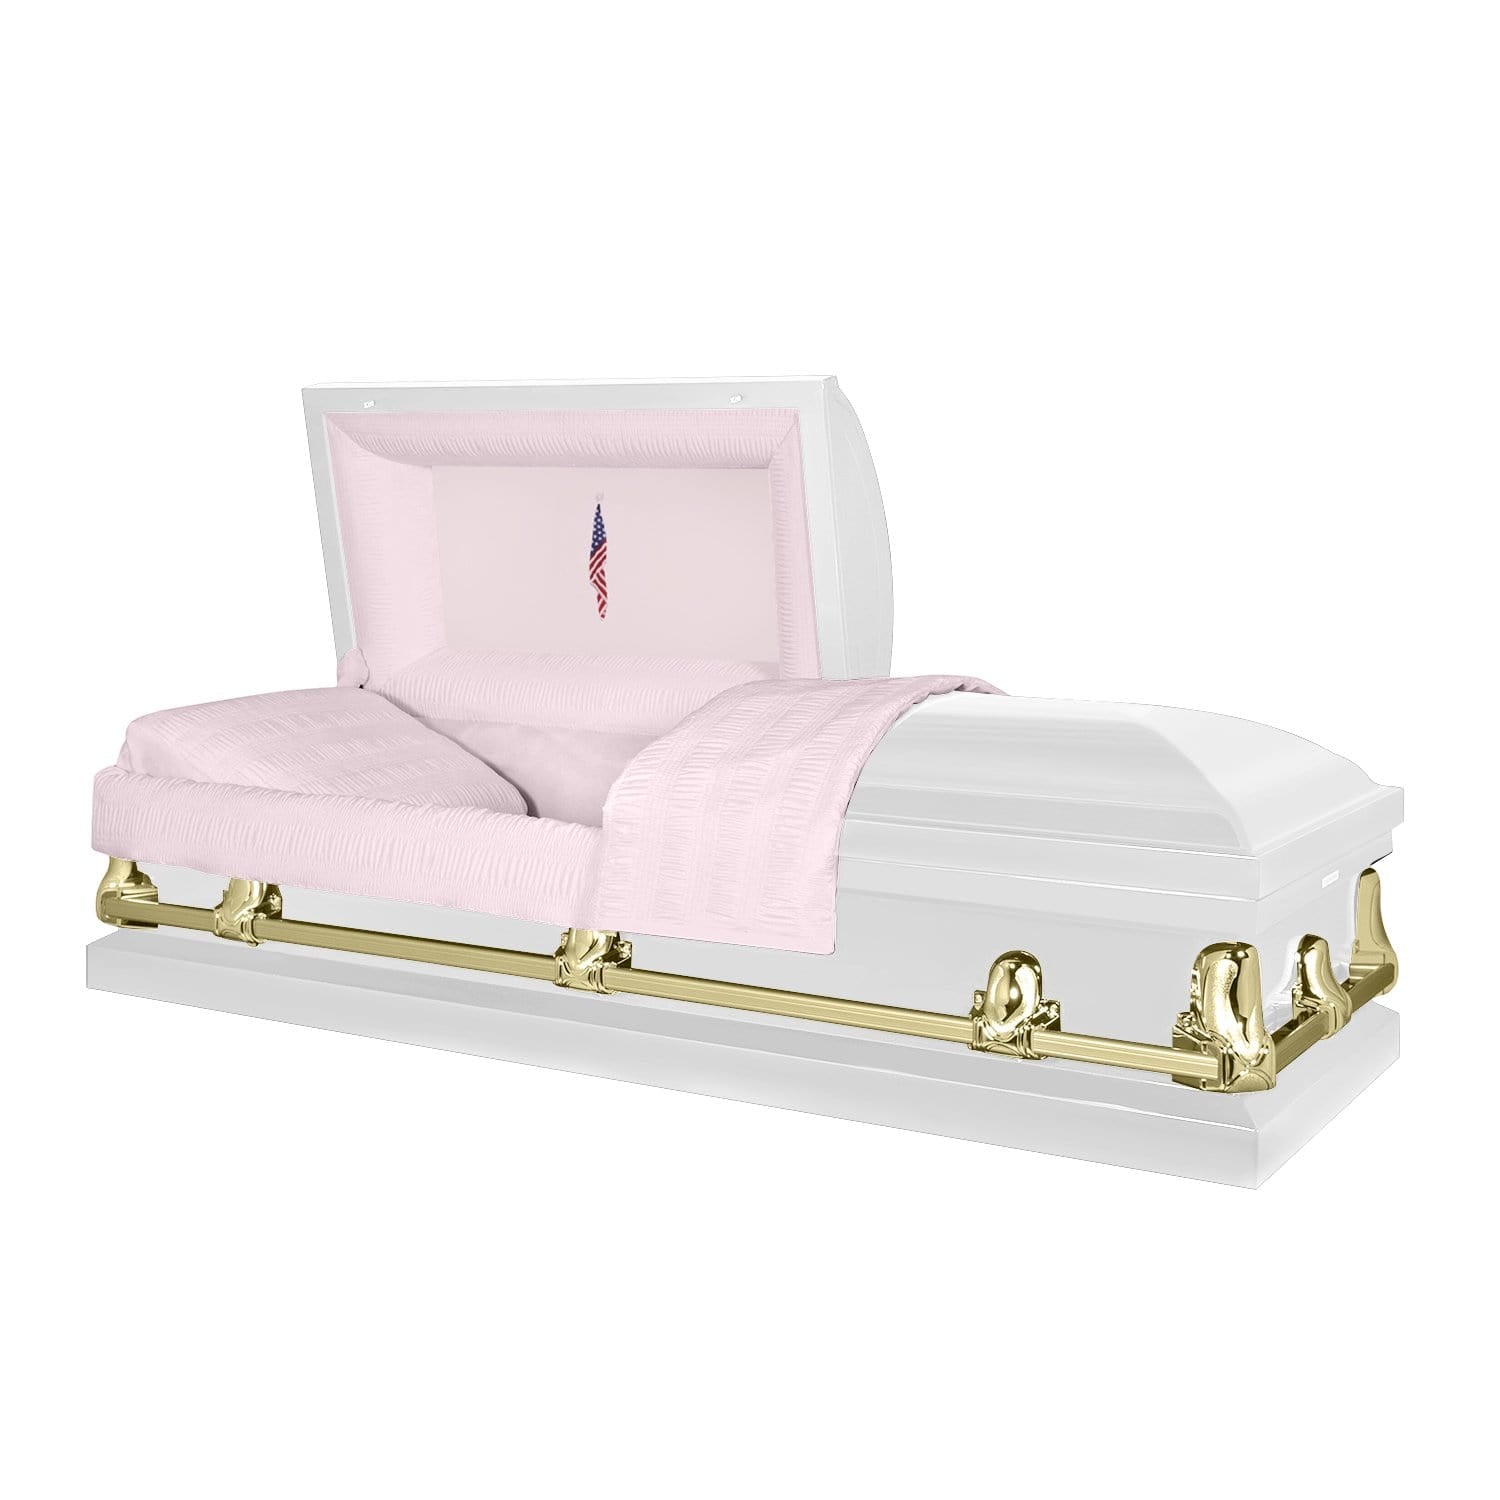 Orion Series | White and Gold Steel Casket with Pink Interior - Titan Casket